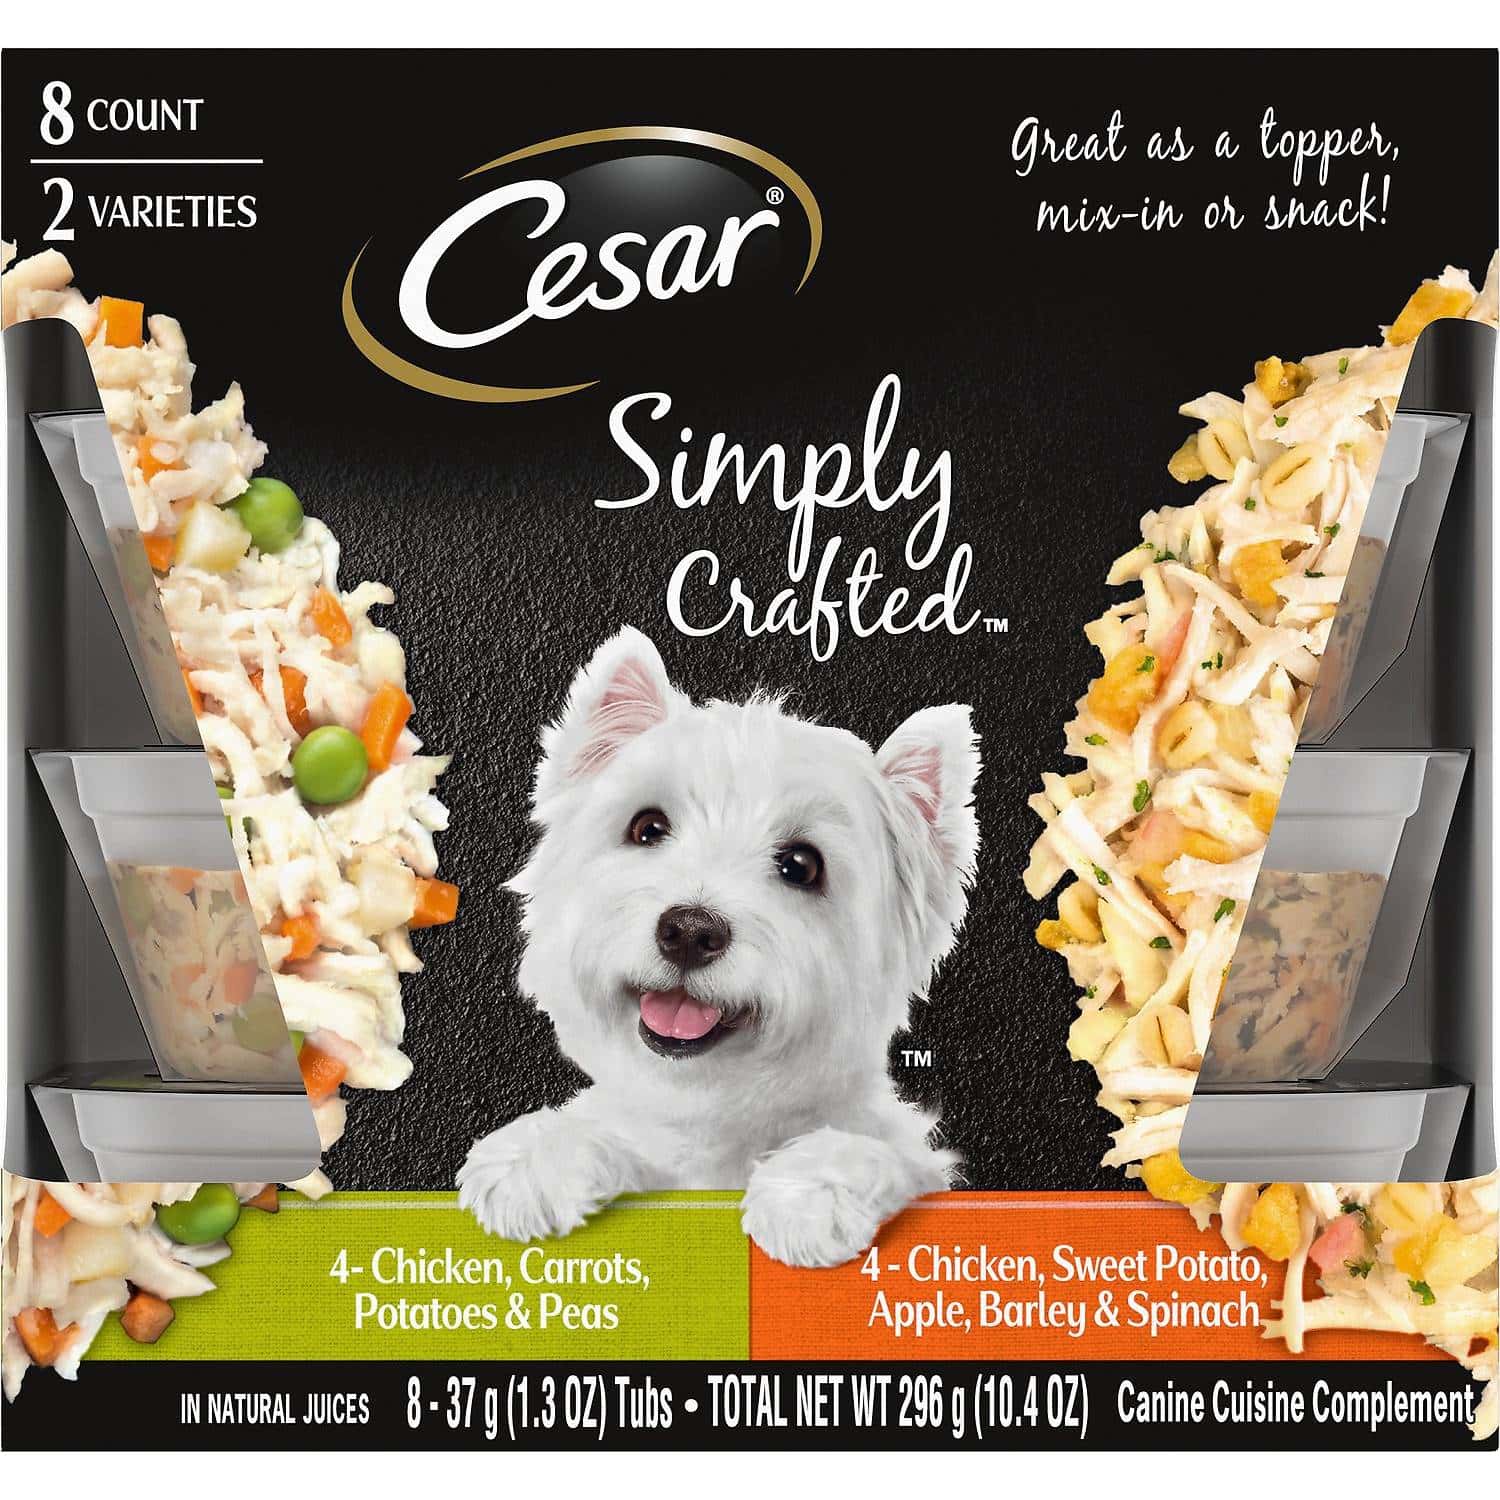 Cesar Simply Crafted Variety Pack Chicken (1)